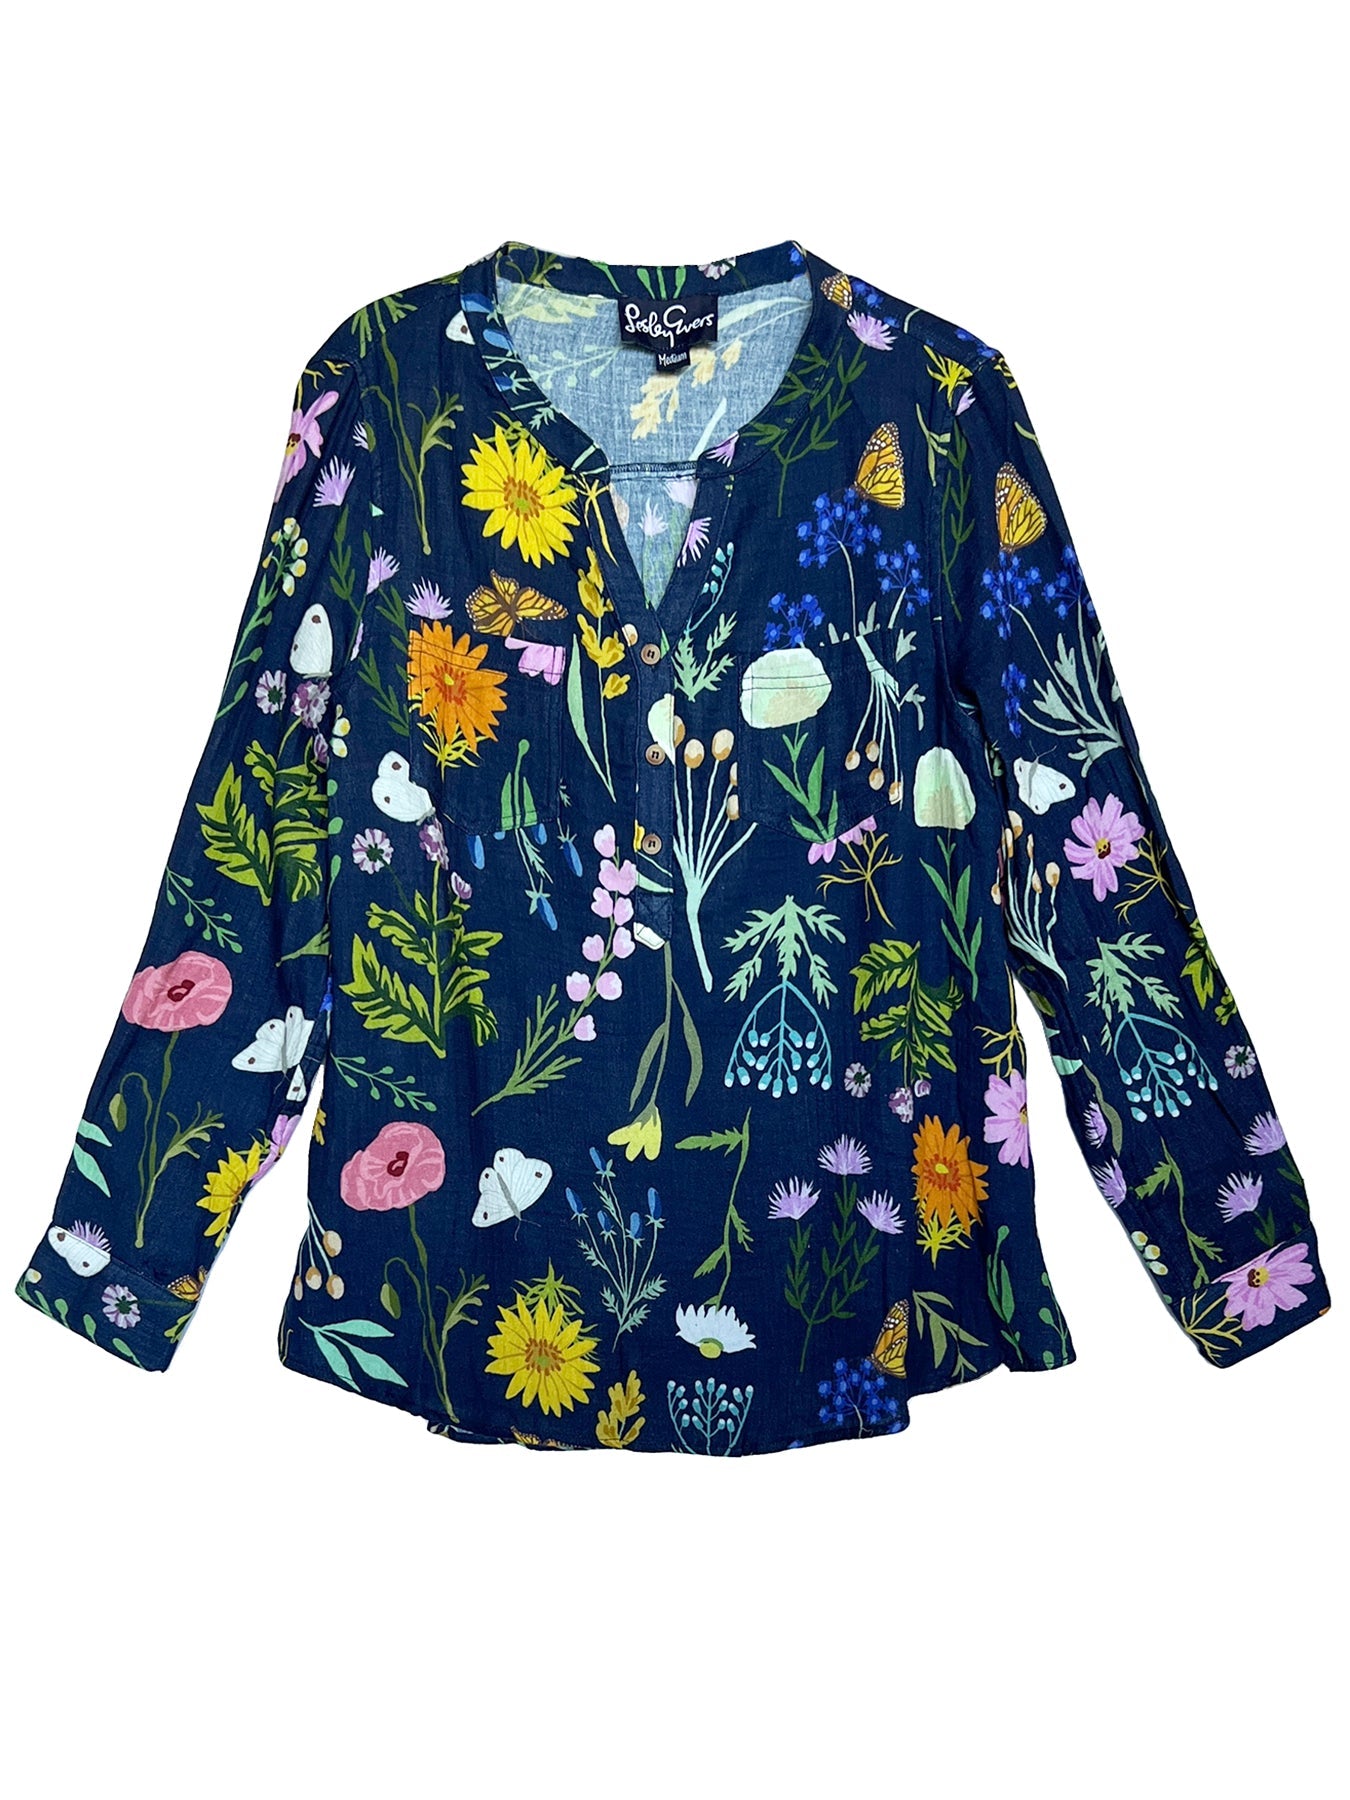 TERESA blouse Prairie Posy Navy - Lesley Evers-Best Seller-Shop-Shop/All Products